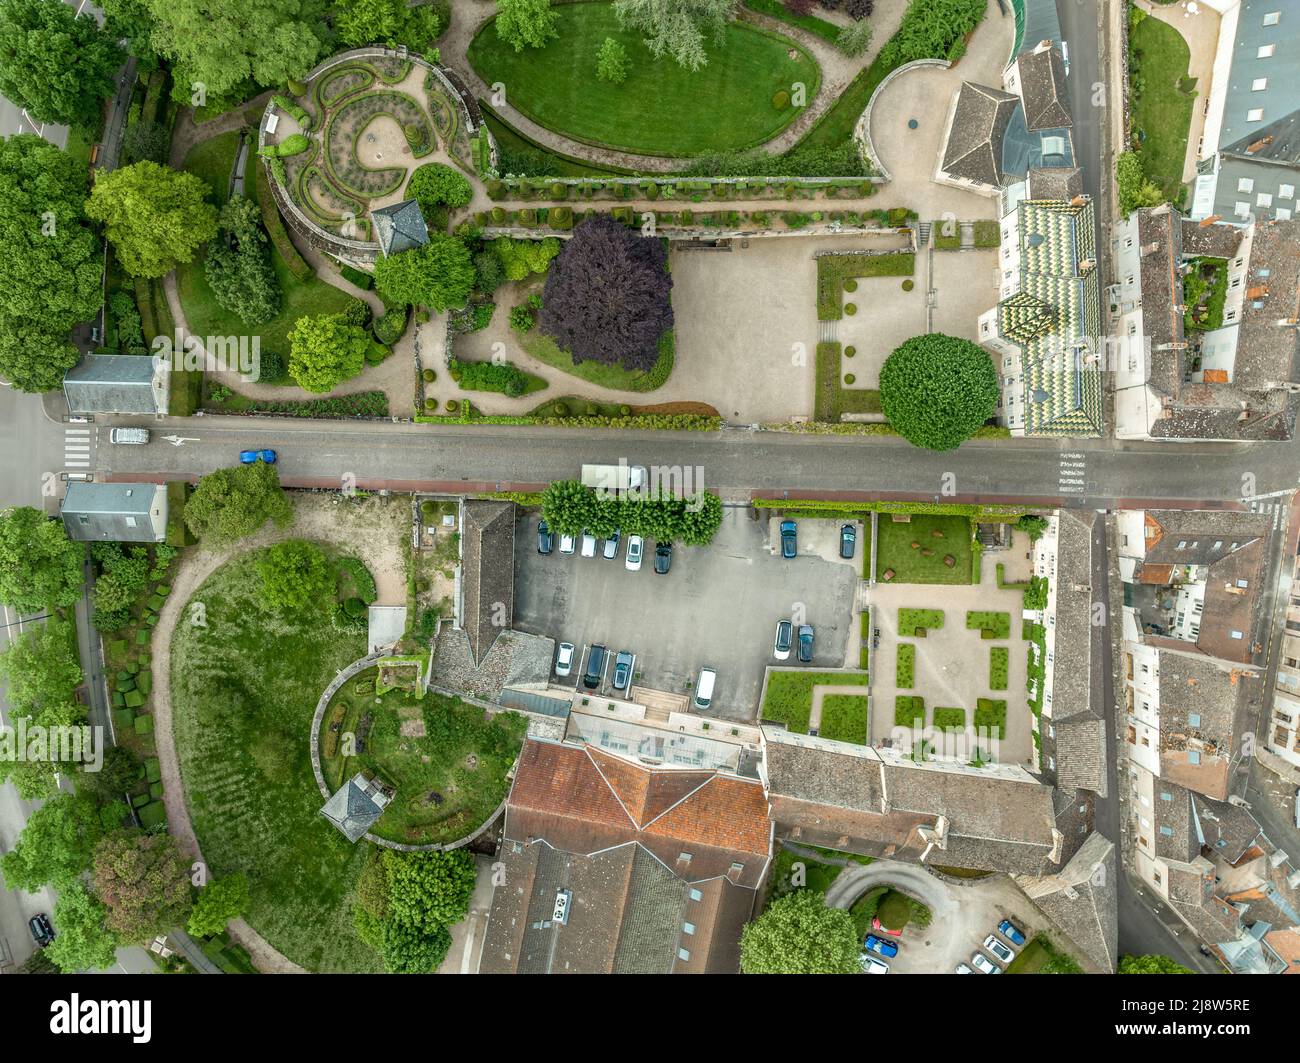 Aerial view of the former castle with four round bastions now a French garden in Beaune, Burgundy France Stock Photo